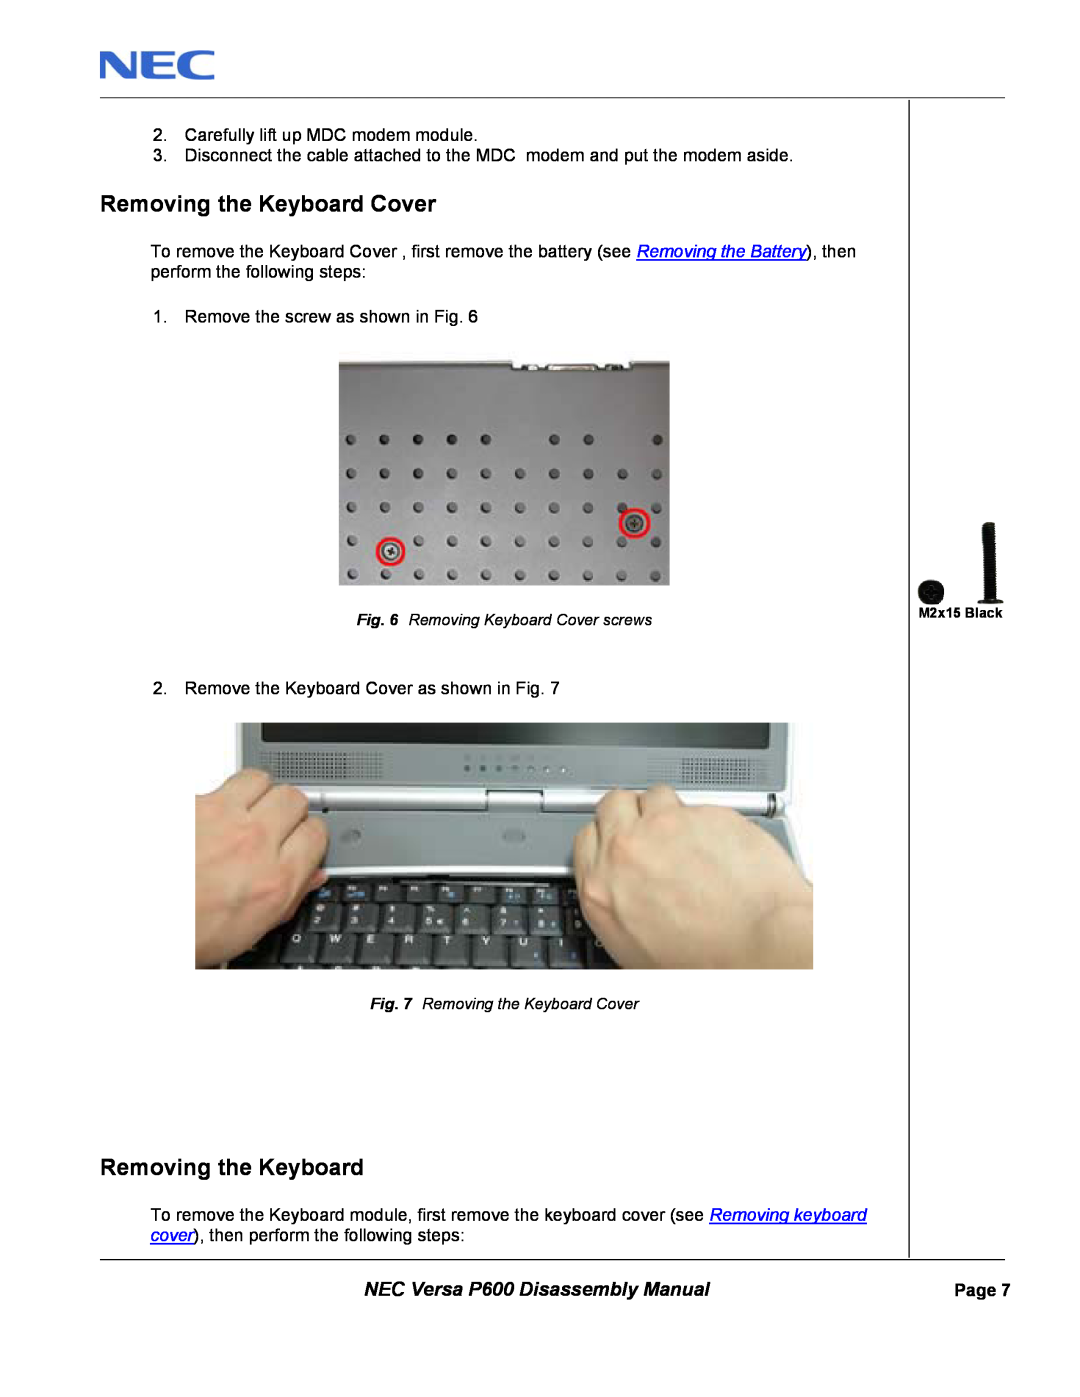 NEC manual Removing the Keyboard Cover, NEC Versa P600 Disassembly Manual 